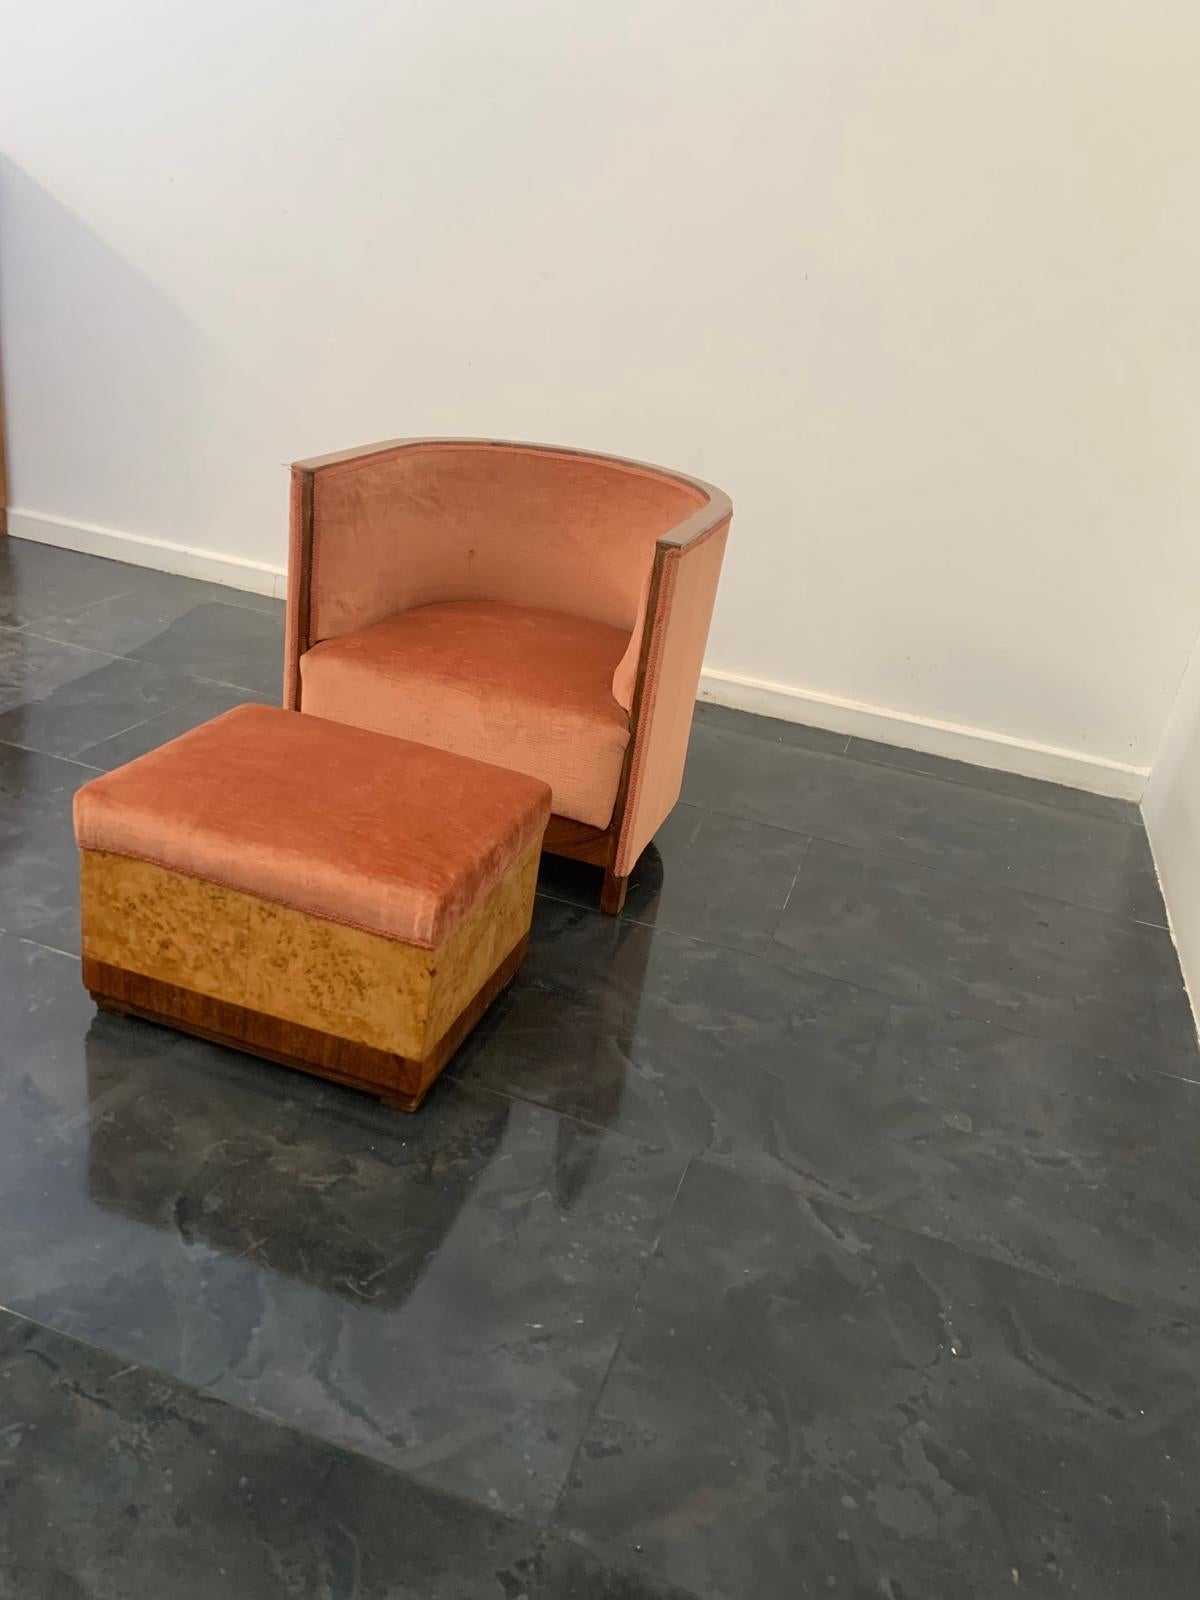 rmchair and pouf in walnut with thuja root. Armchair measures: h63x61 x depth 64 cm; seat height - 35 cm. The pouf: h40x37x48 cm. Solid and usable, with insignificant signs of wear. The style is art deco with rational lines.
Packaging with bubble